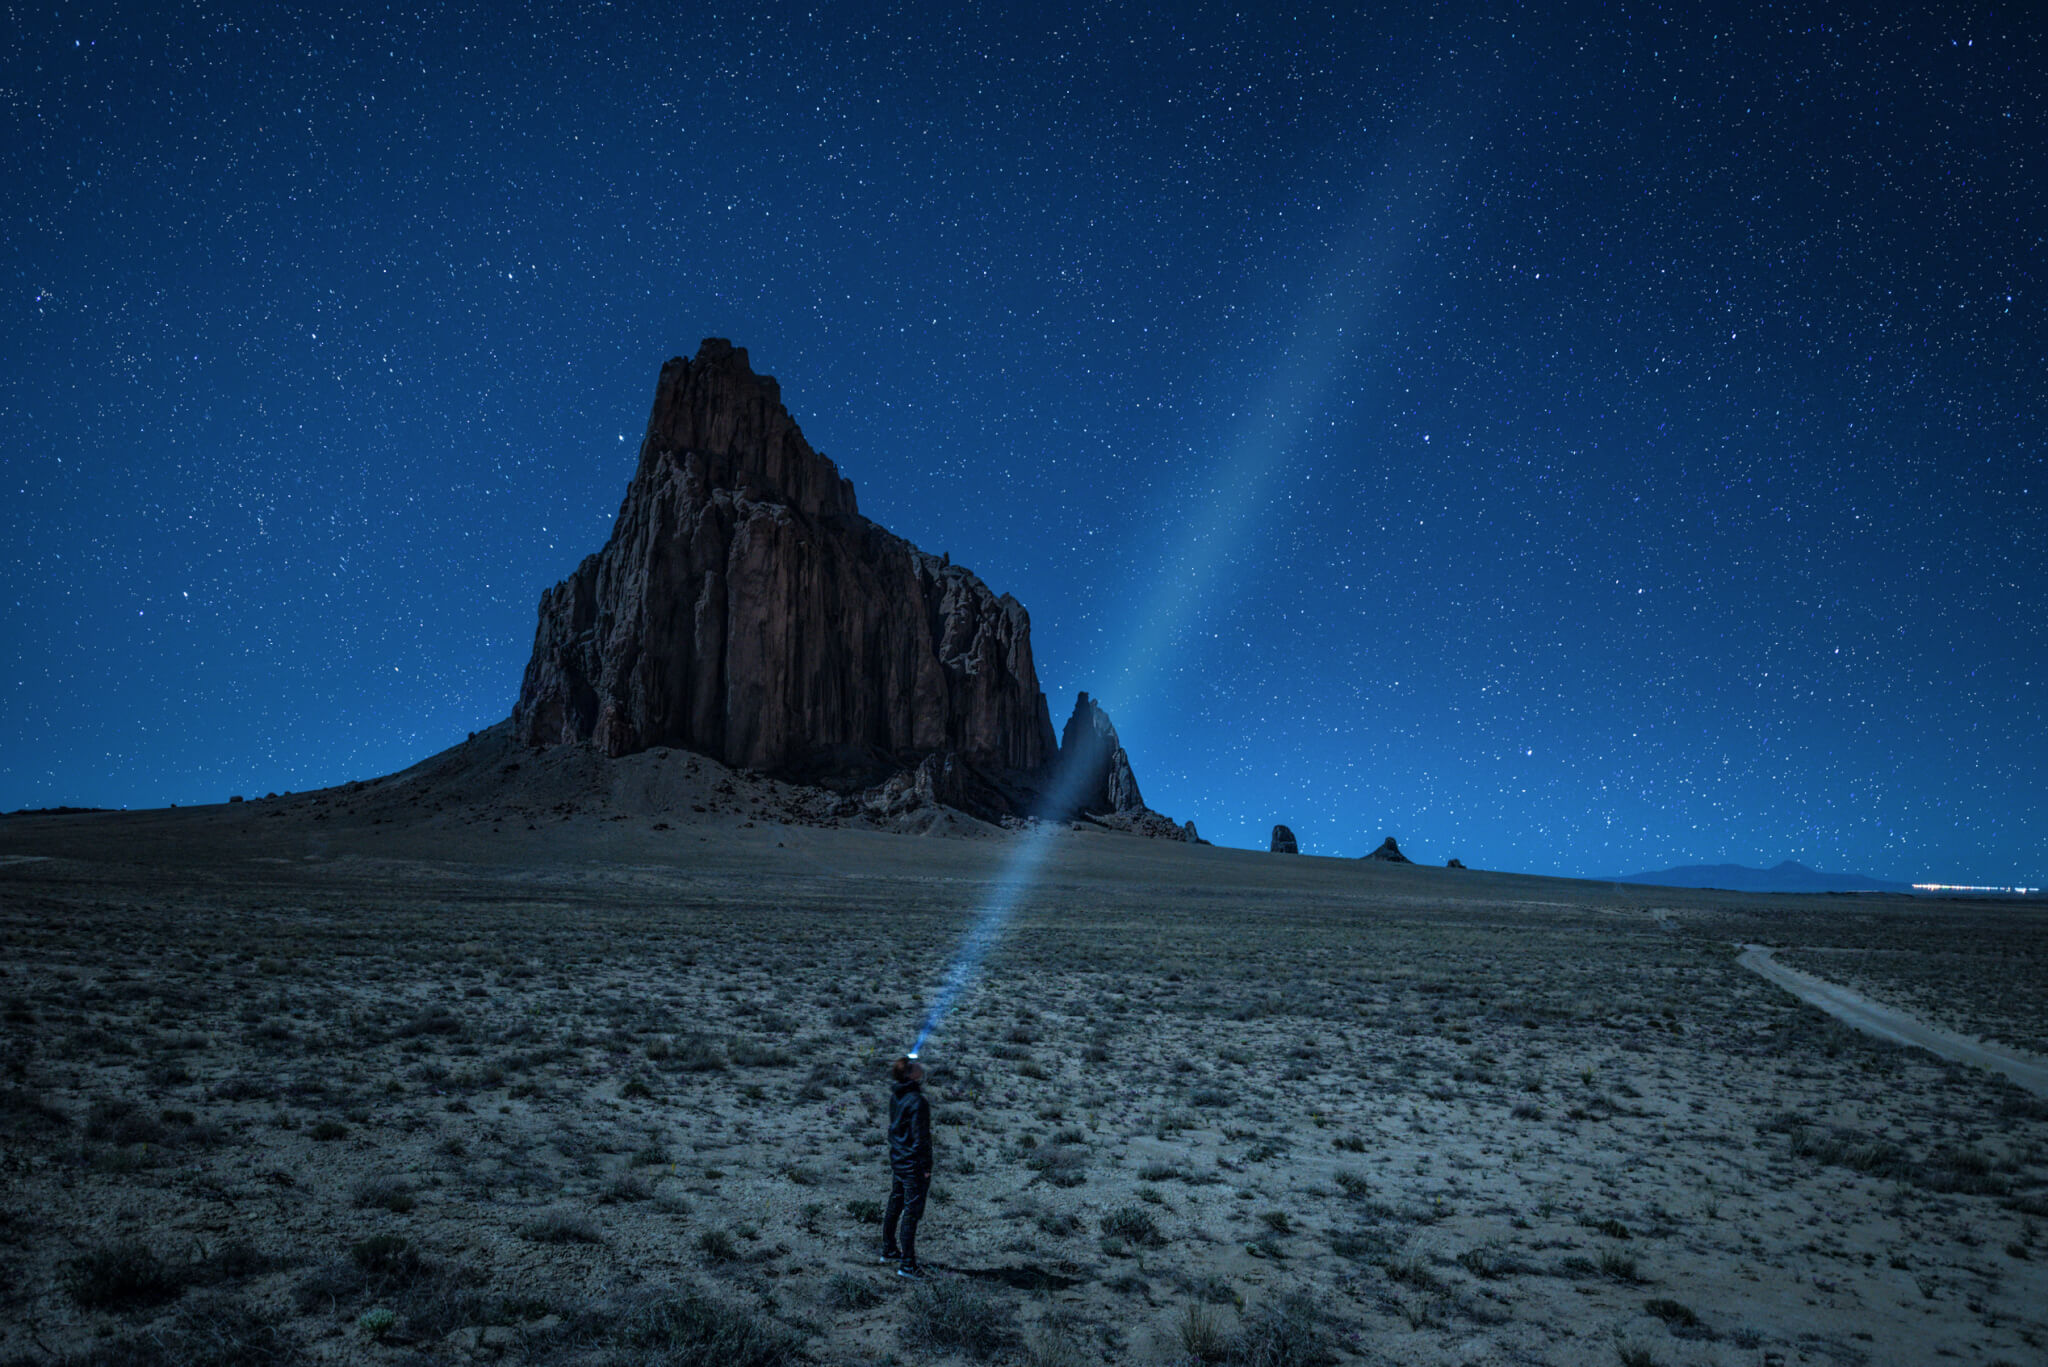 Hiker with a head lamp under the night sky near Shiprock, New Mexico